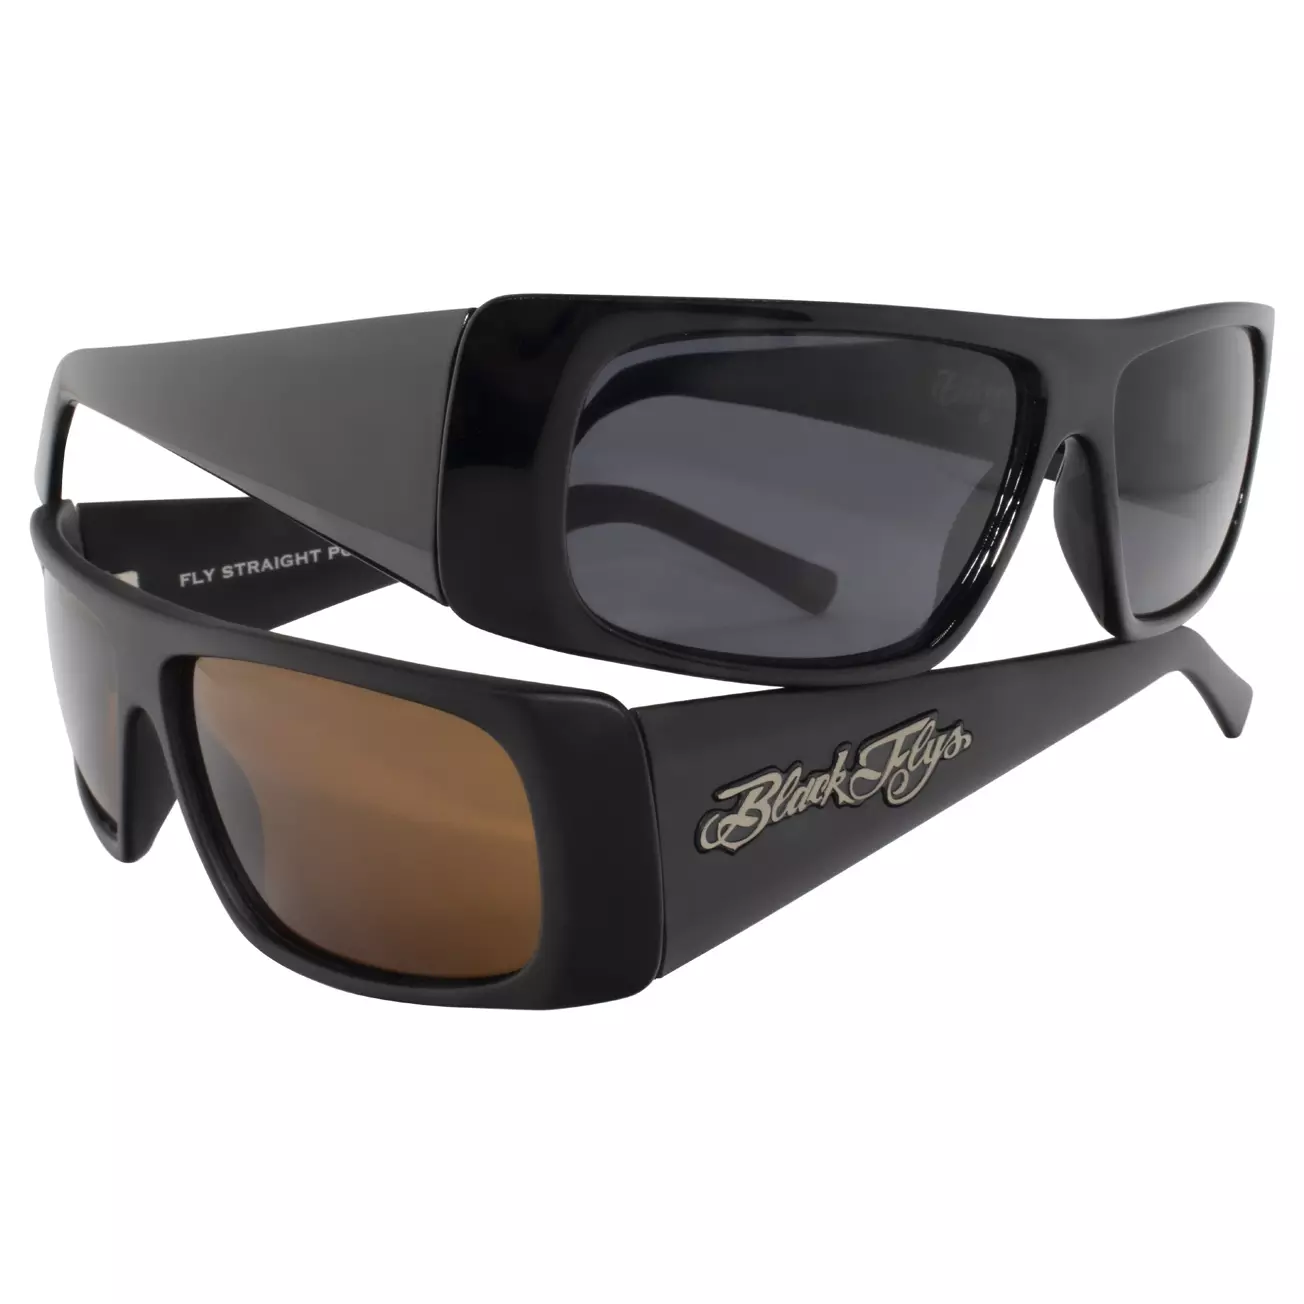 Sunglasses Fly Straight | Sunglasses Black Flys and Fly Girls